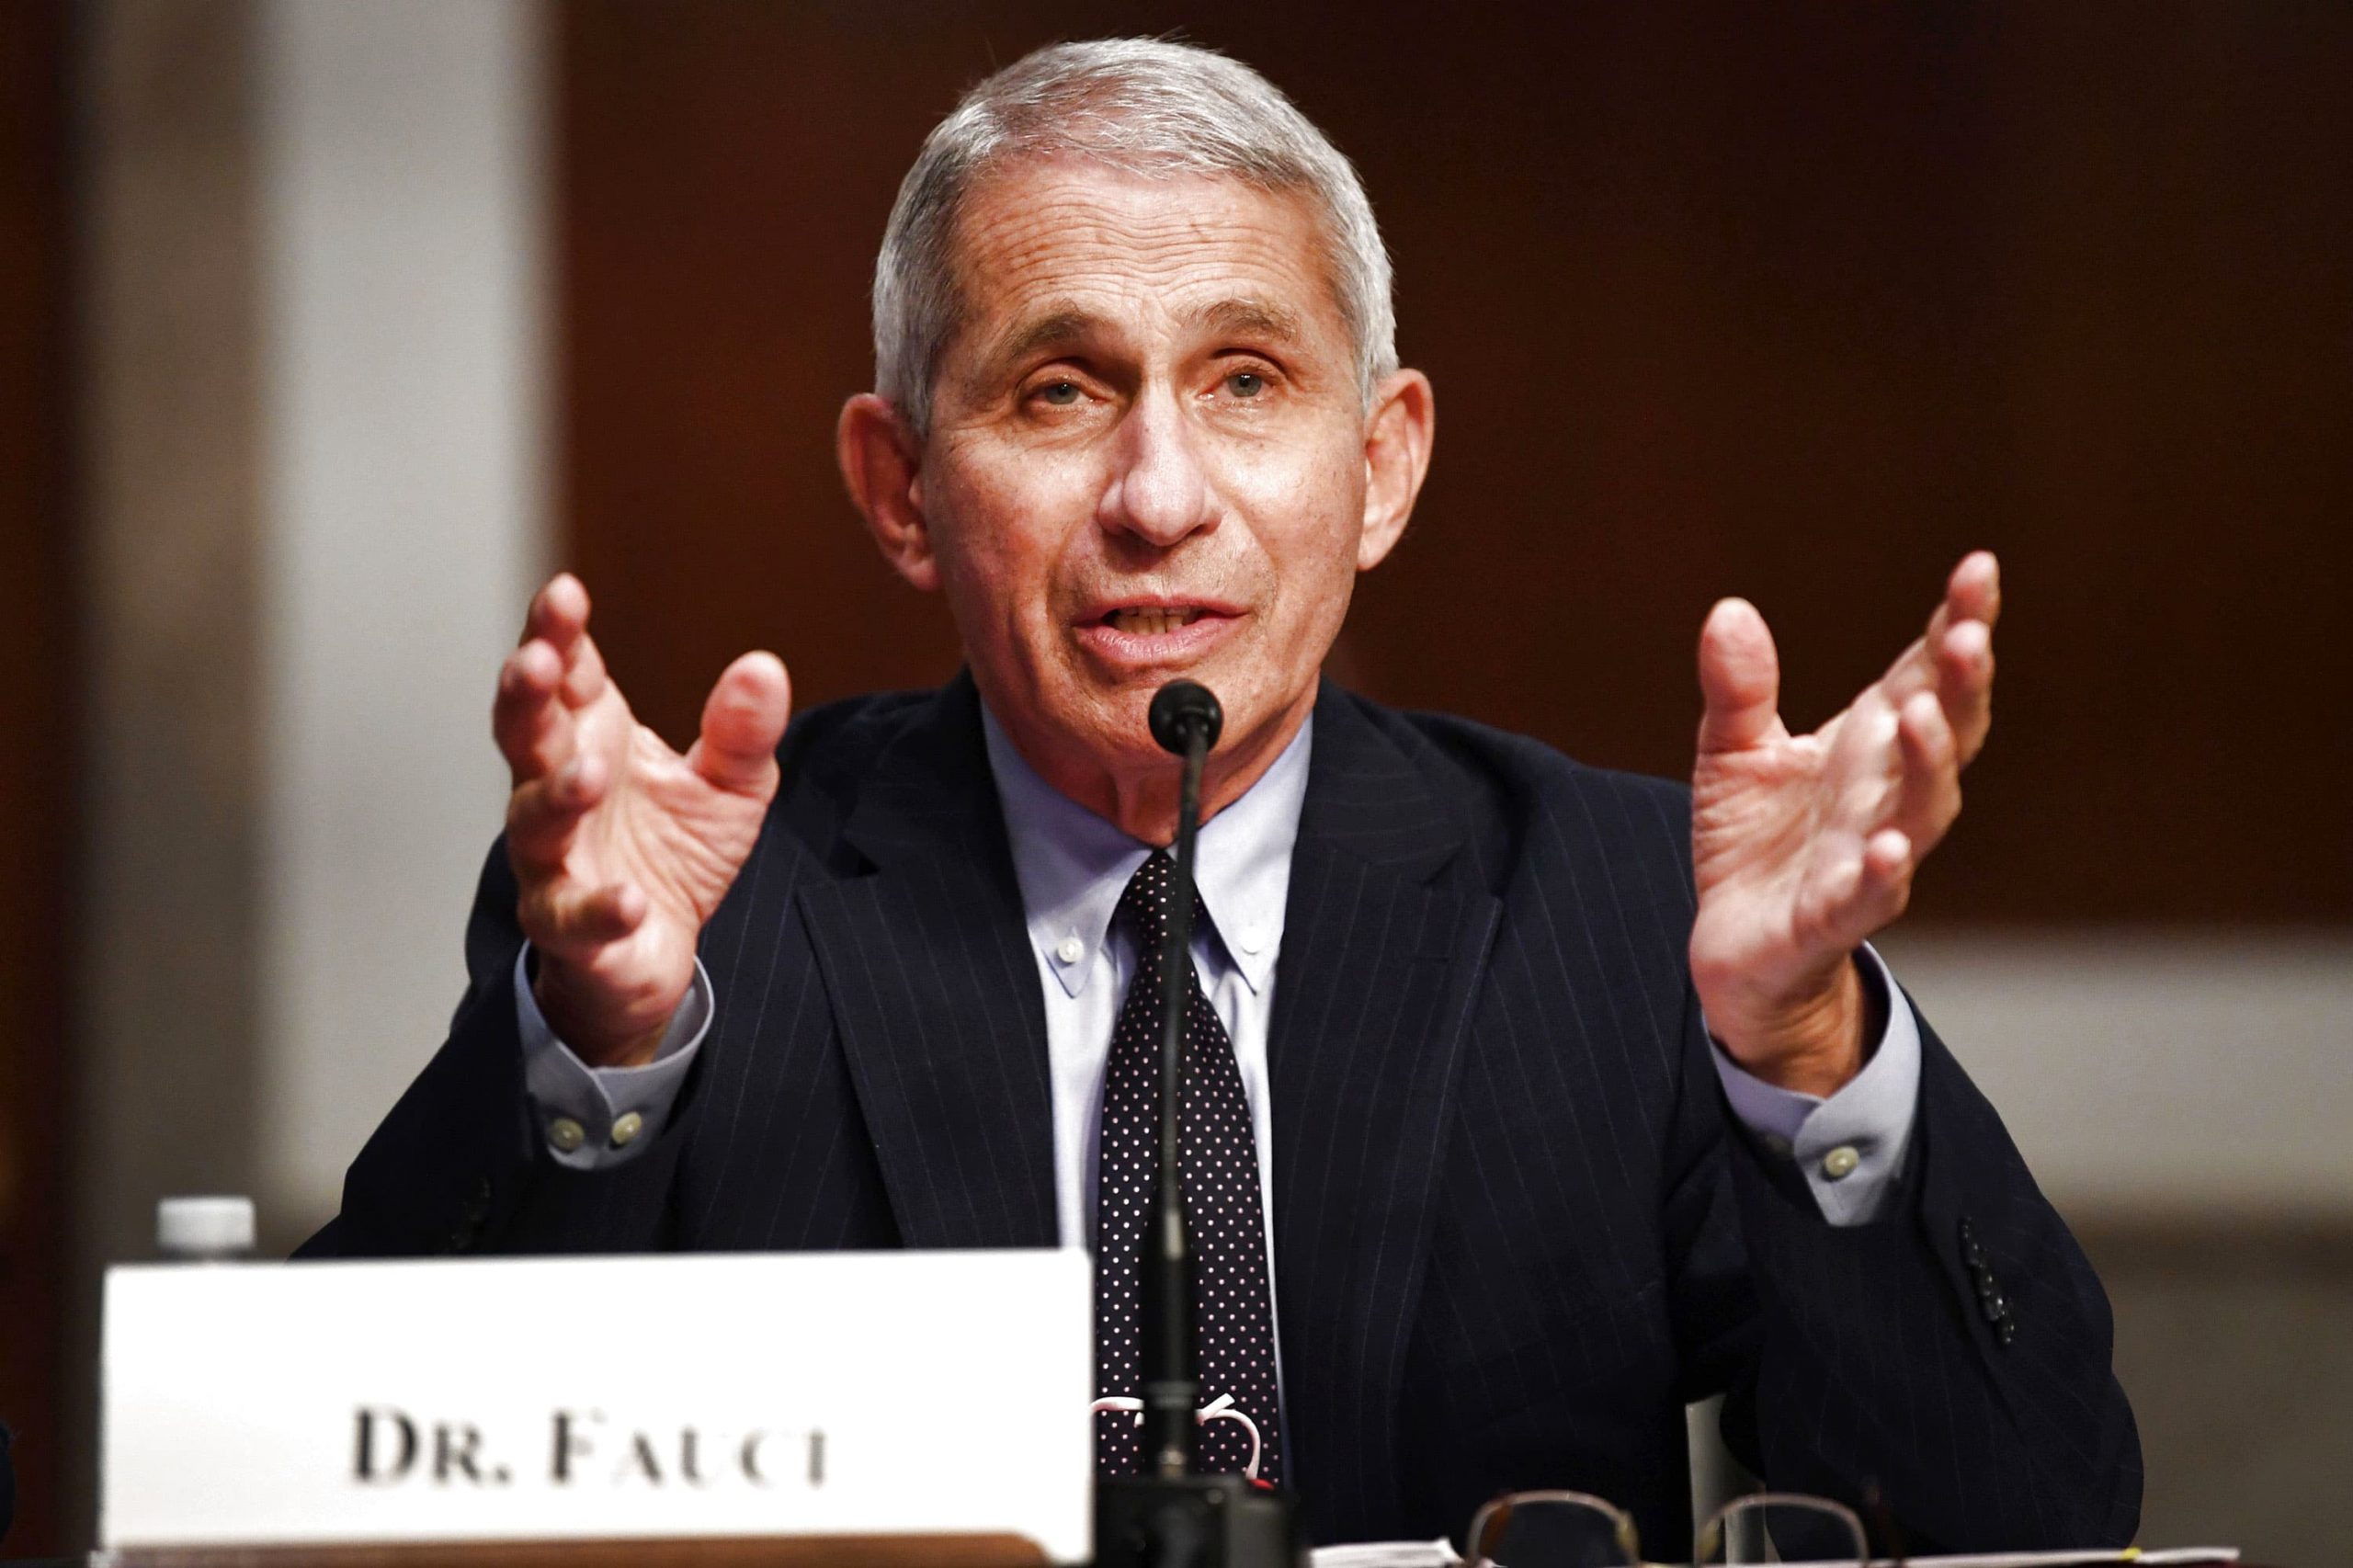 Dr. Fauci says Covid vaccine trials on pregnant women and young kids could begin in January